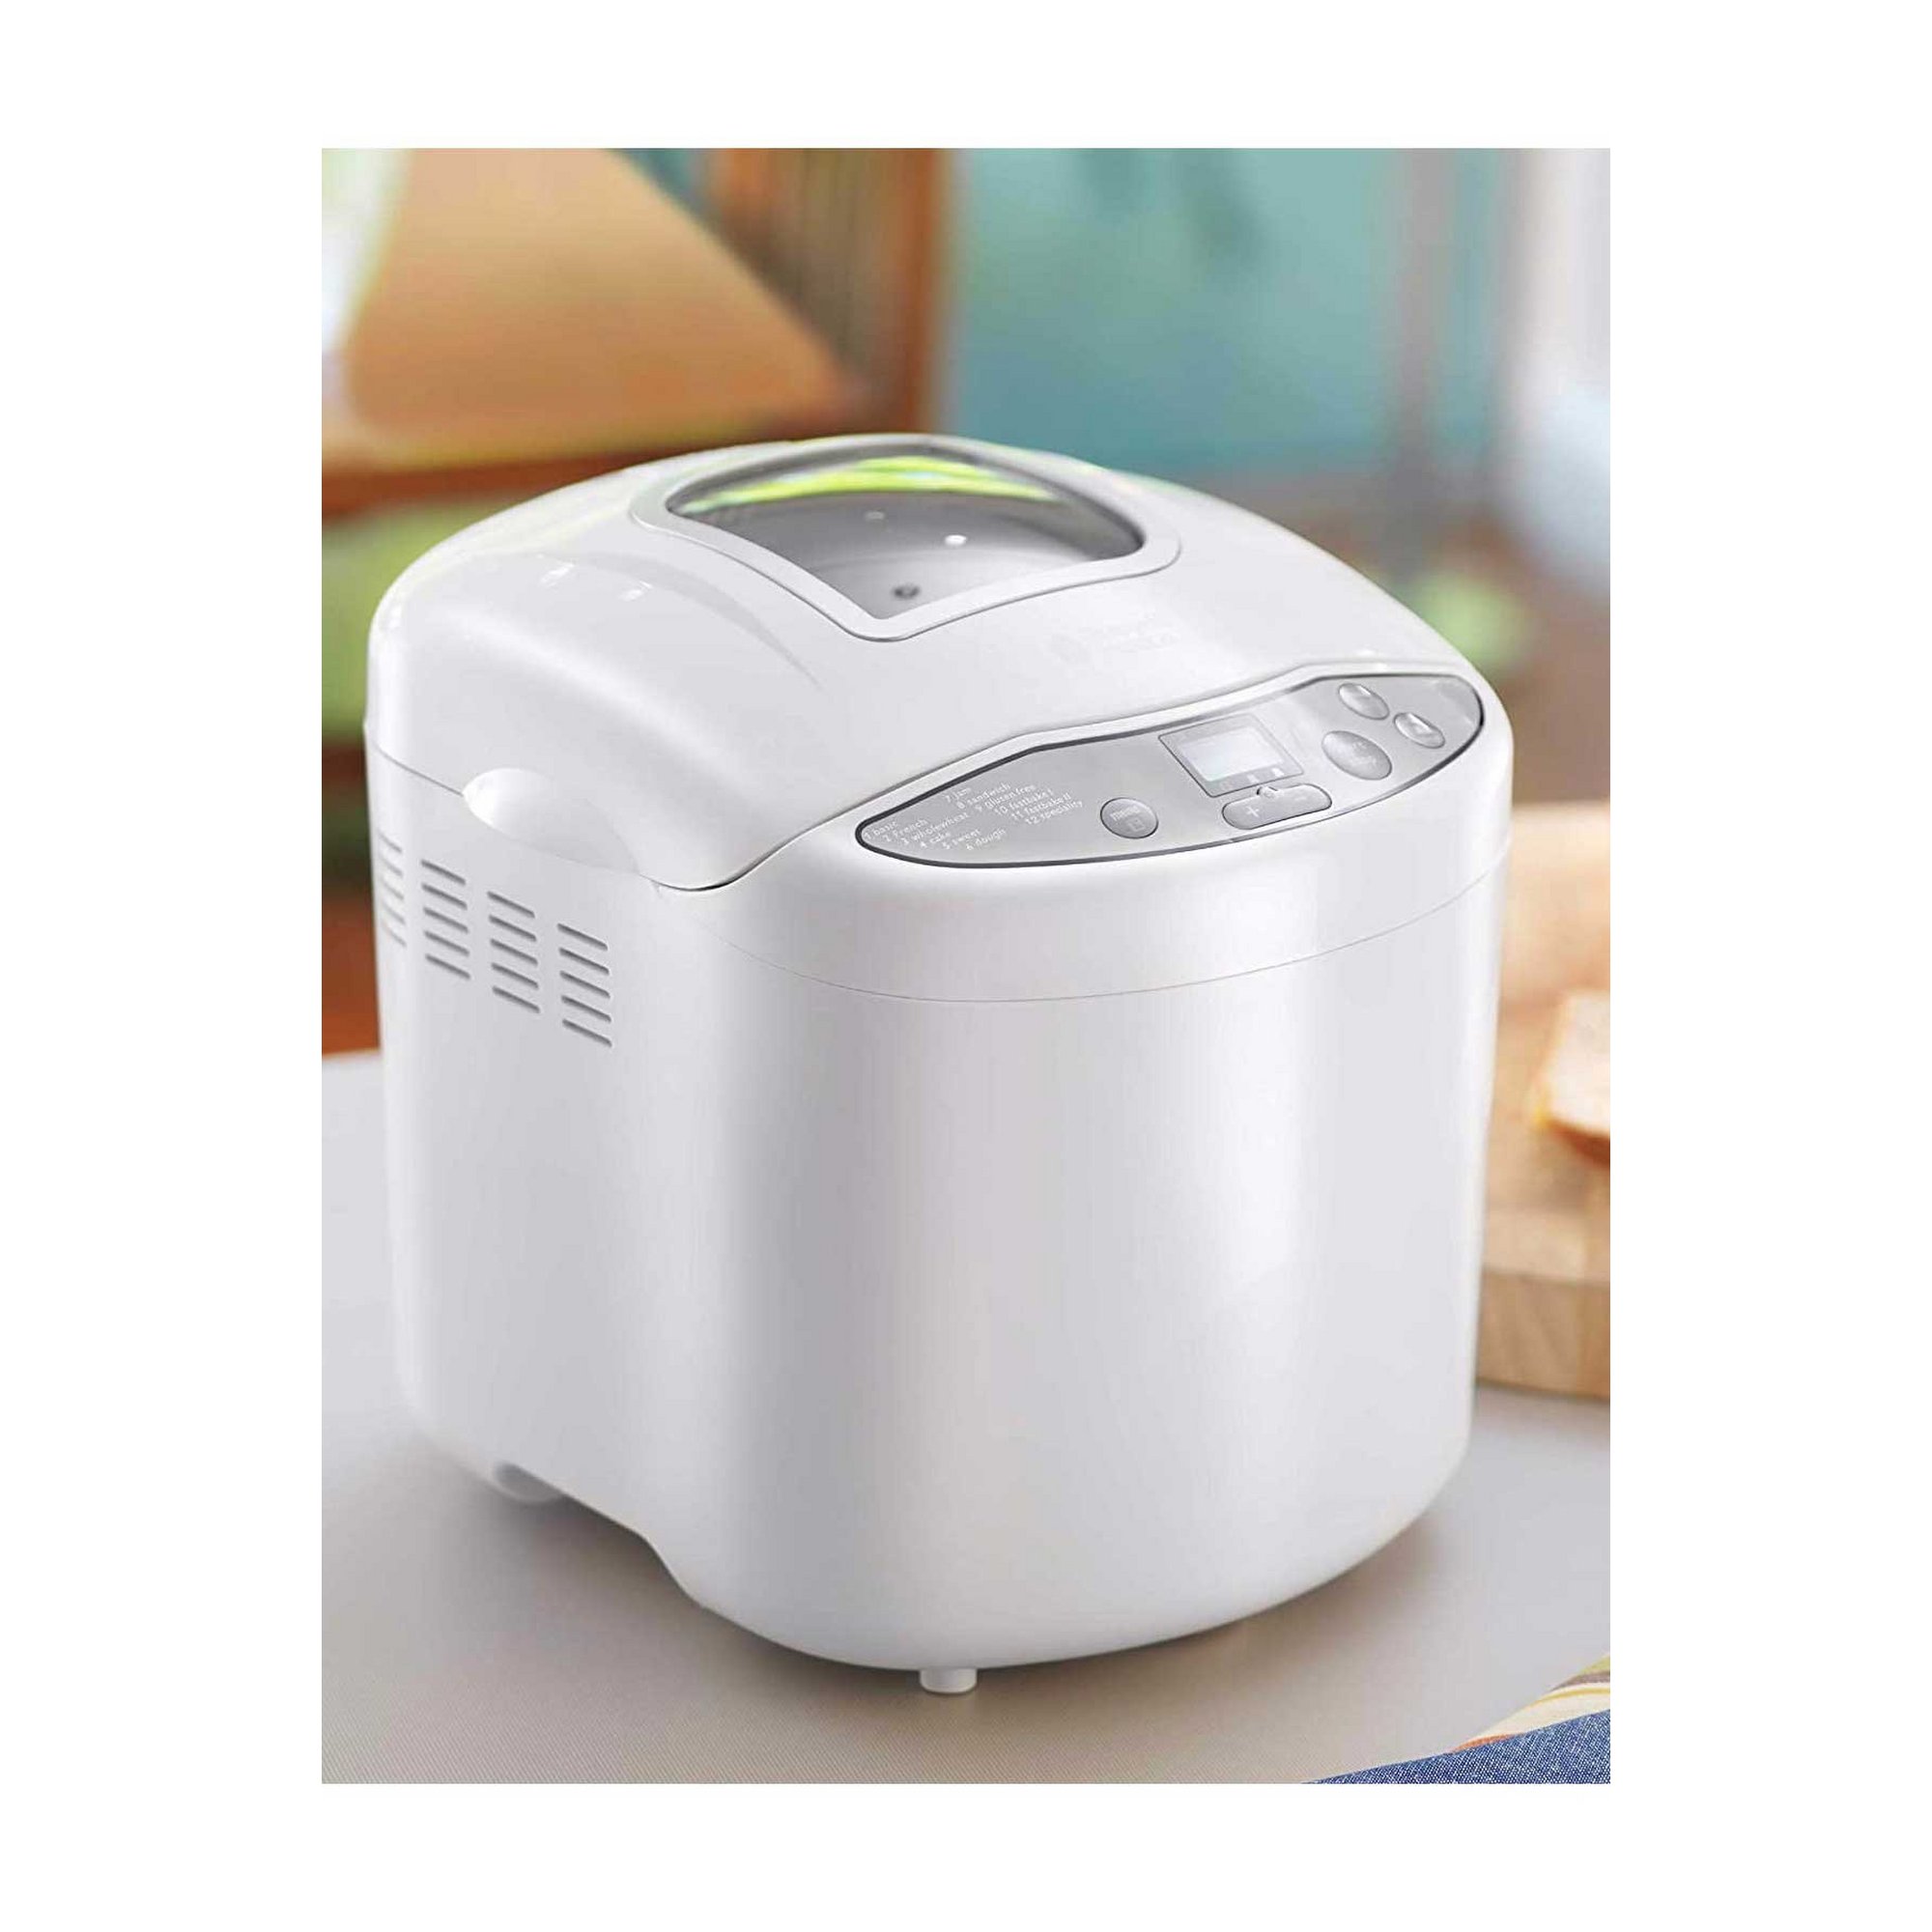 Russell Hobbs Russell Hobbs Compact Fast Bake Bread Maker | White